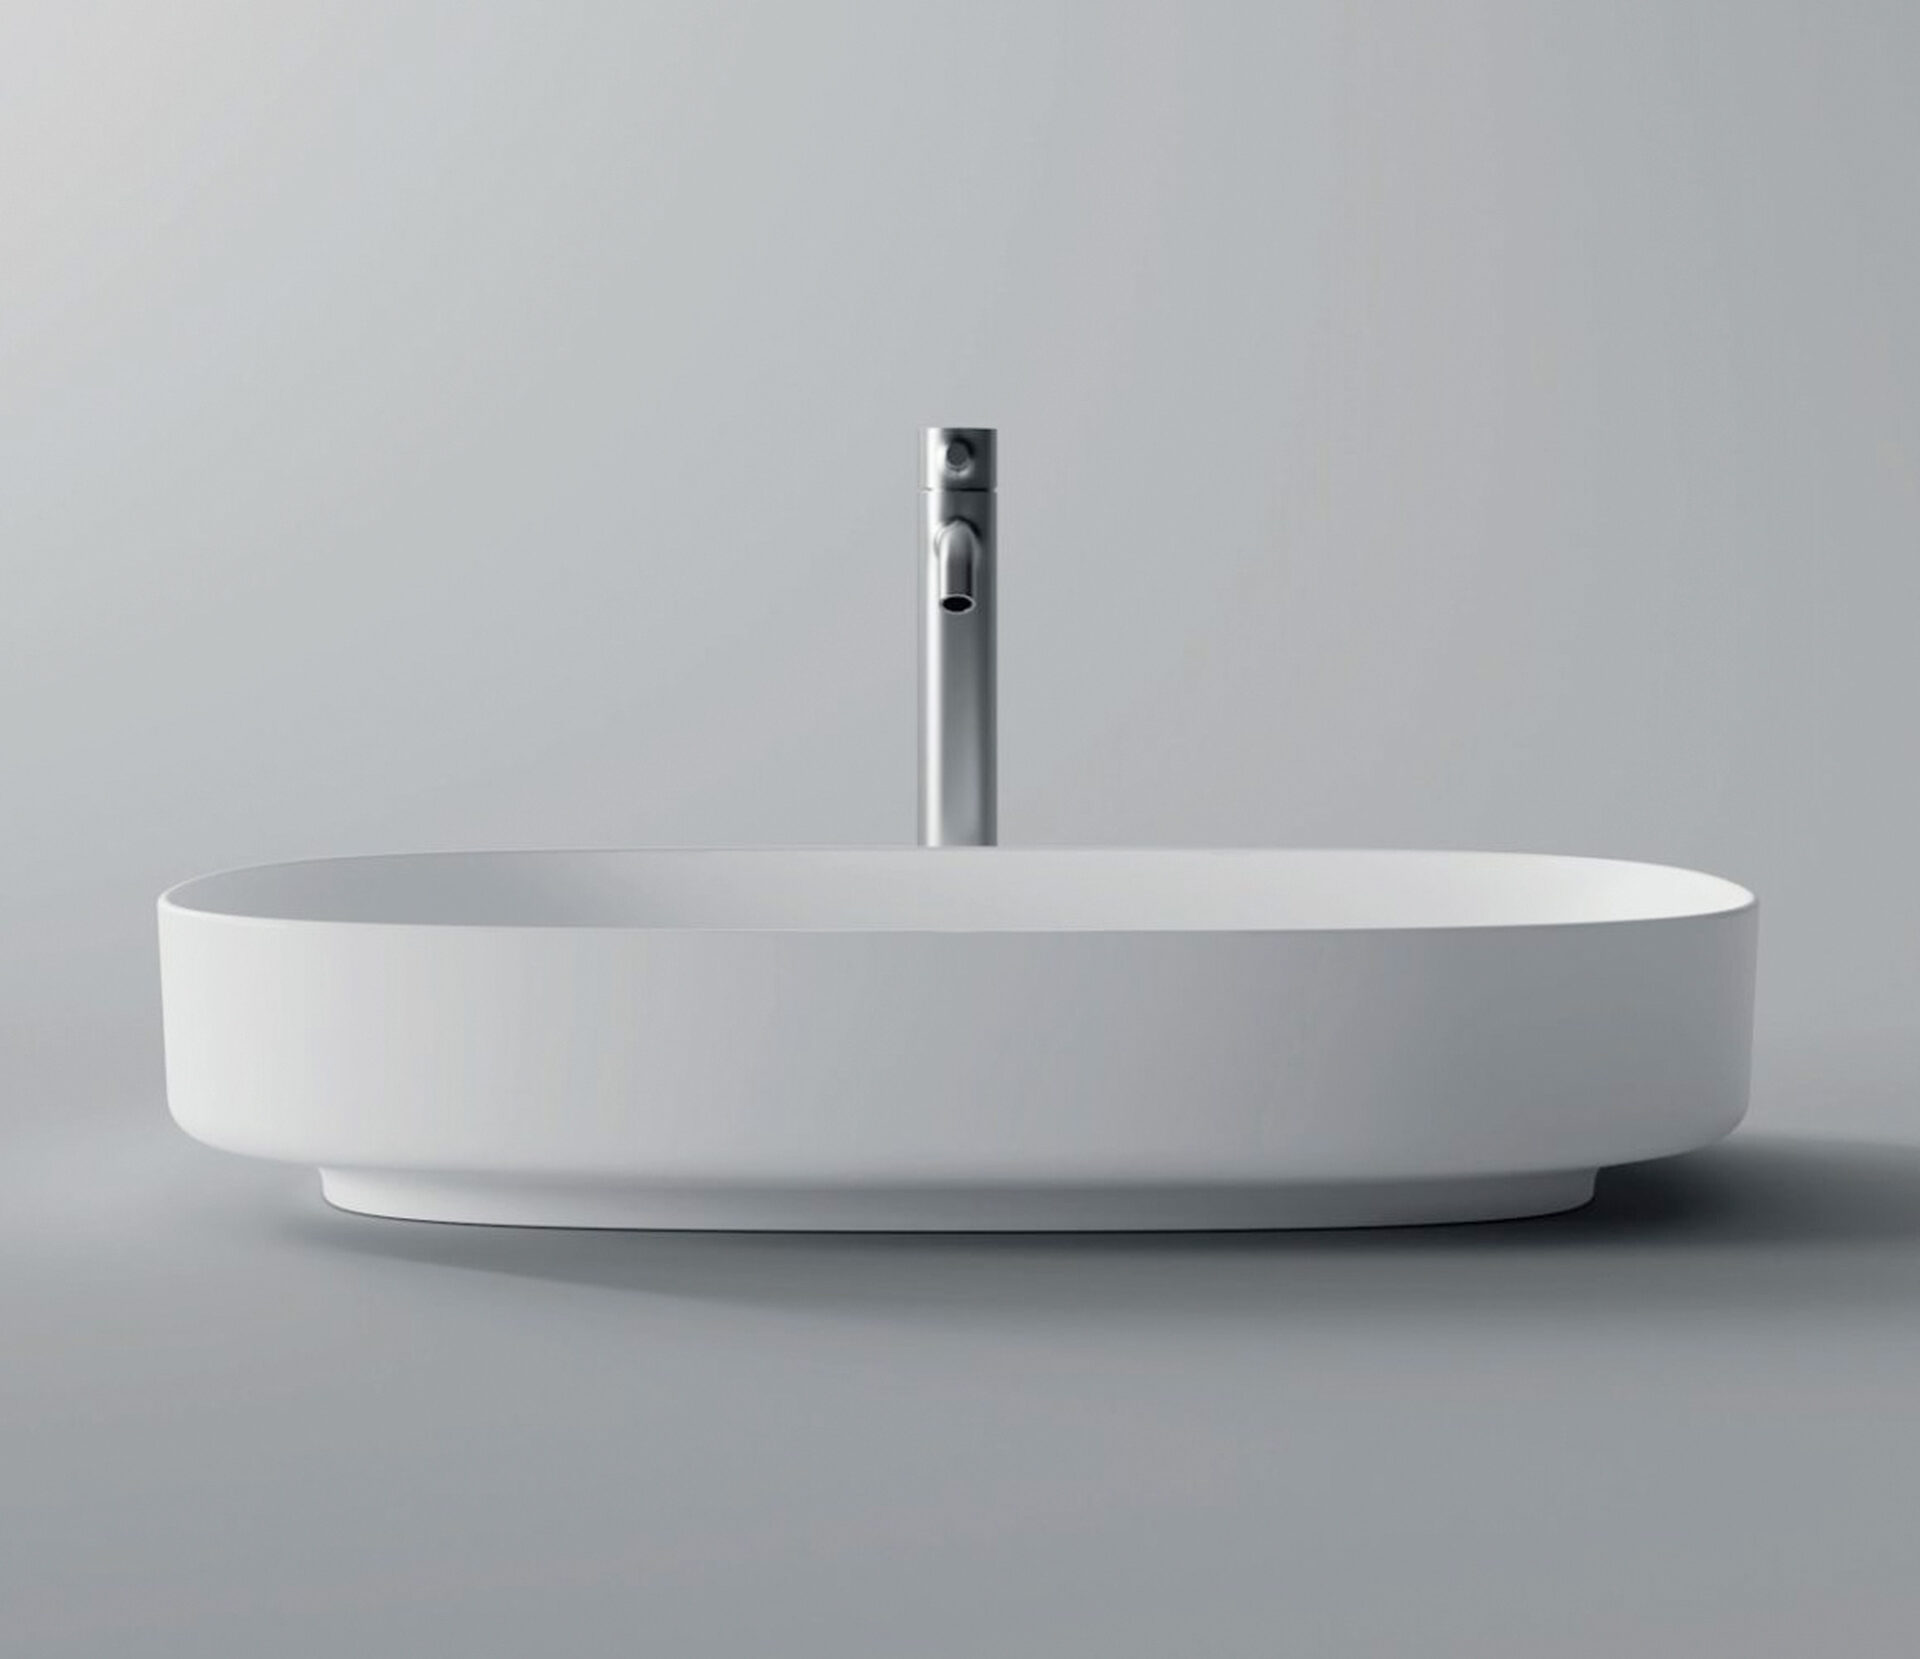 The Form basin collection offers a new contemporary style with its smooth sanitary edges and is known for its floating effect on the bottom.